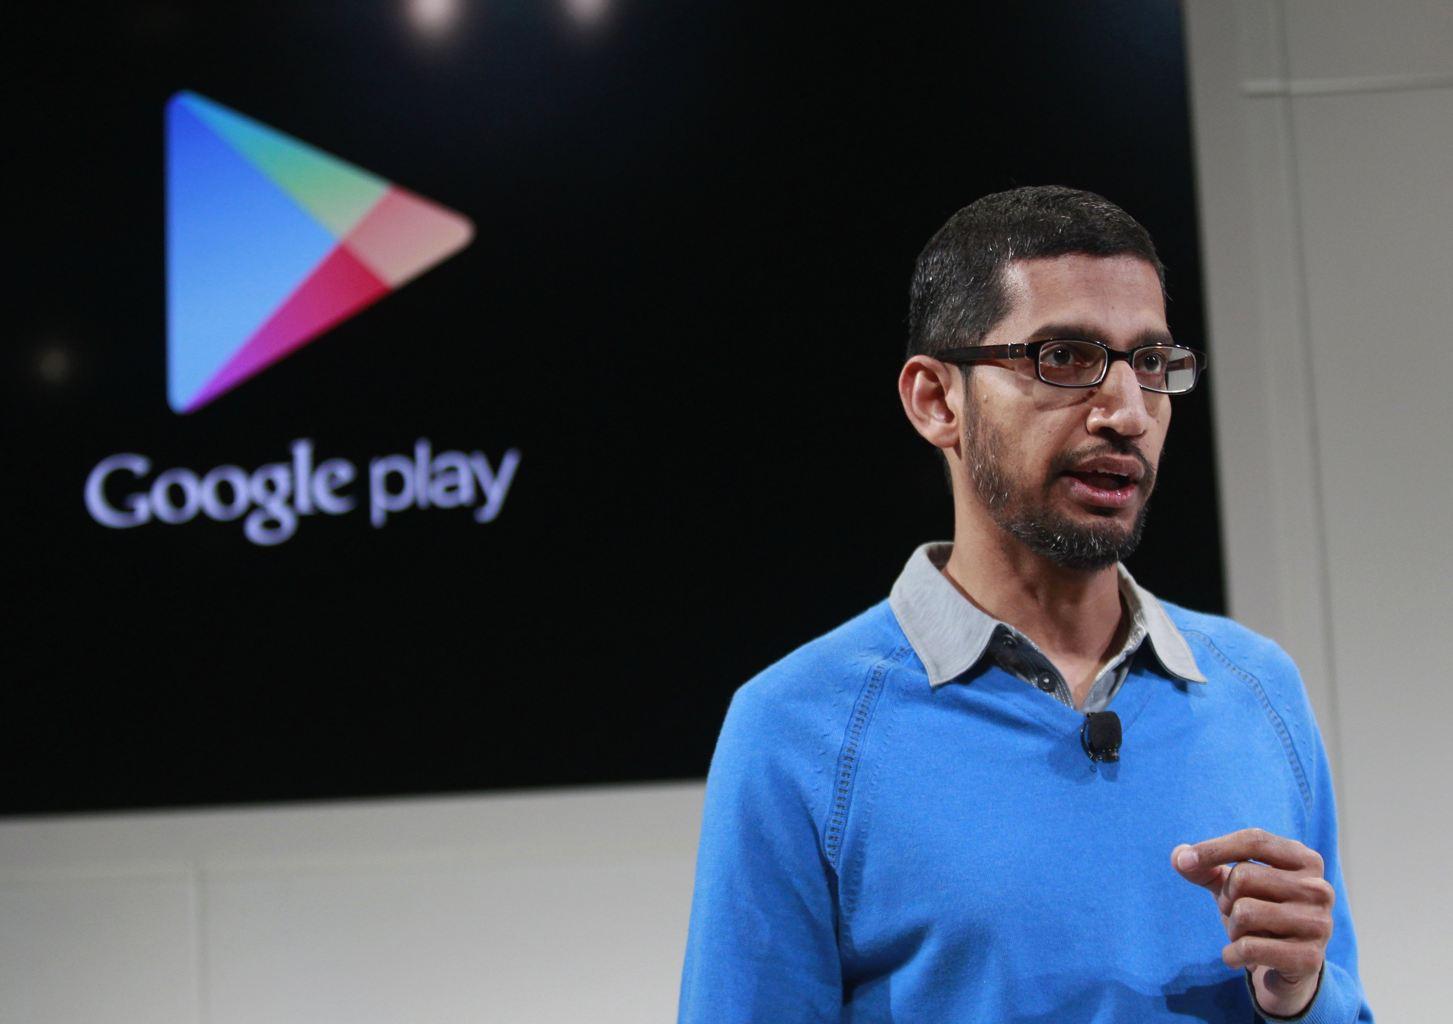 Just 4 Share with you: Androids head Sundar Pichai rumored to be top